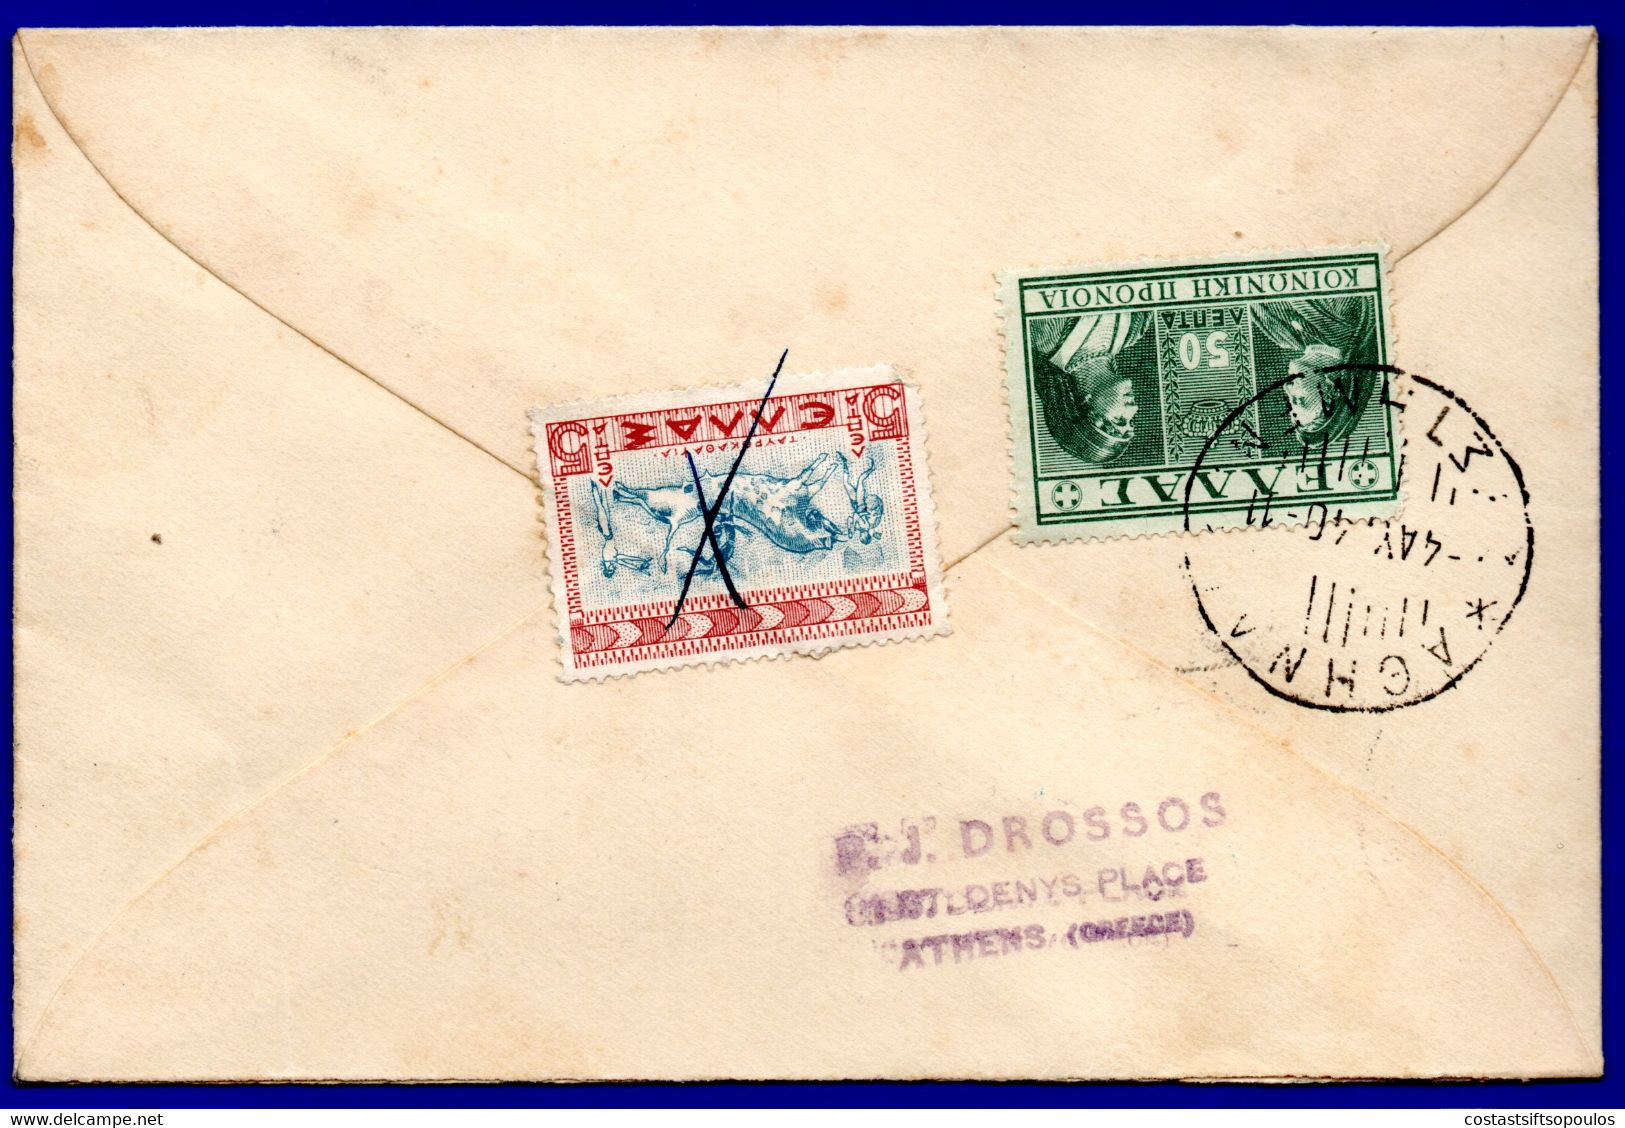 1292.GREECE 1940 E.O.N. NATIONAL YOUTH ORG. 65 & 100 DR. AIR MAIL ST. ON COVER TO JANINA,VERY SCARCE - Lettres & Documents